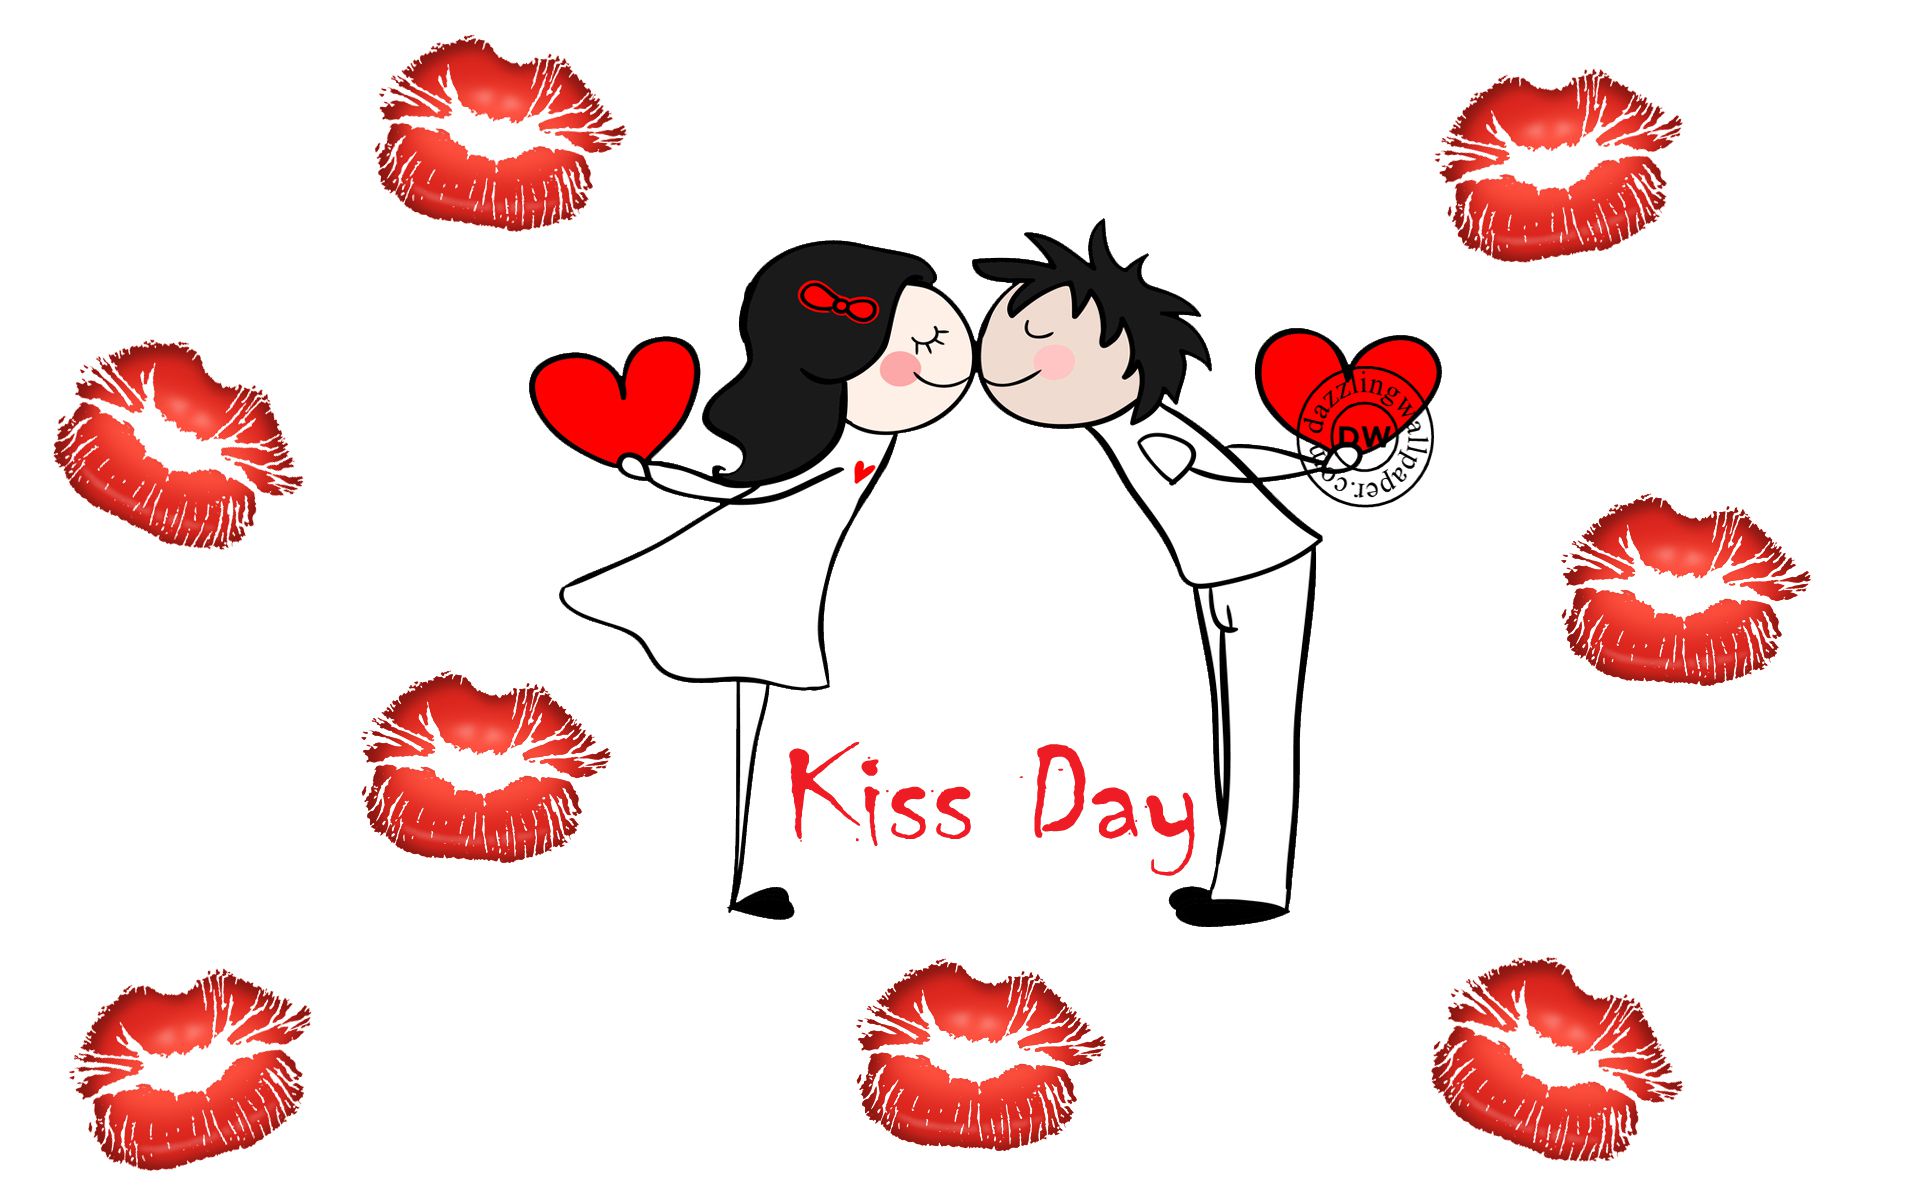 Kiss Day Wishes Sms February Love